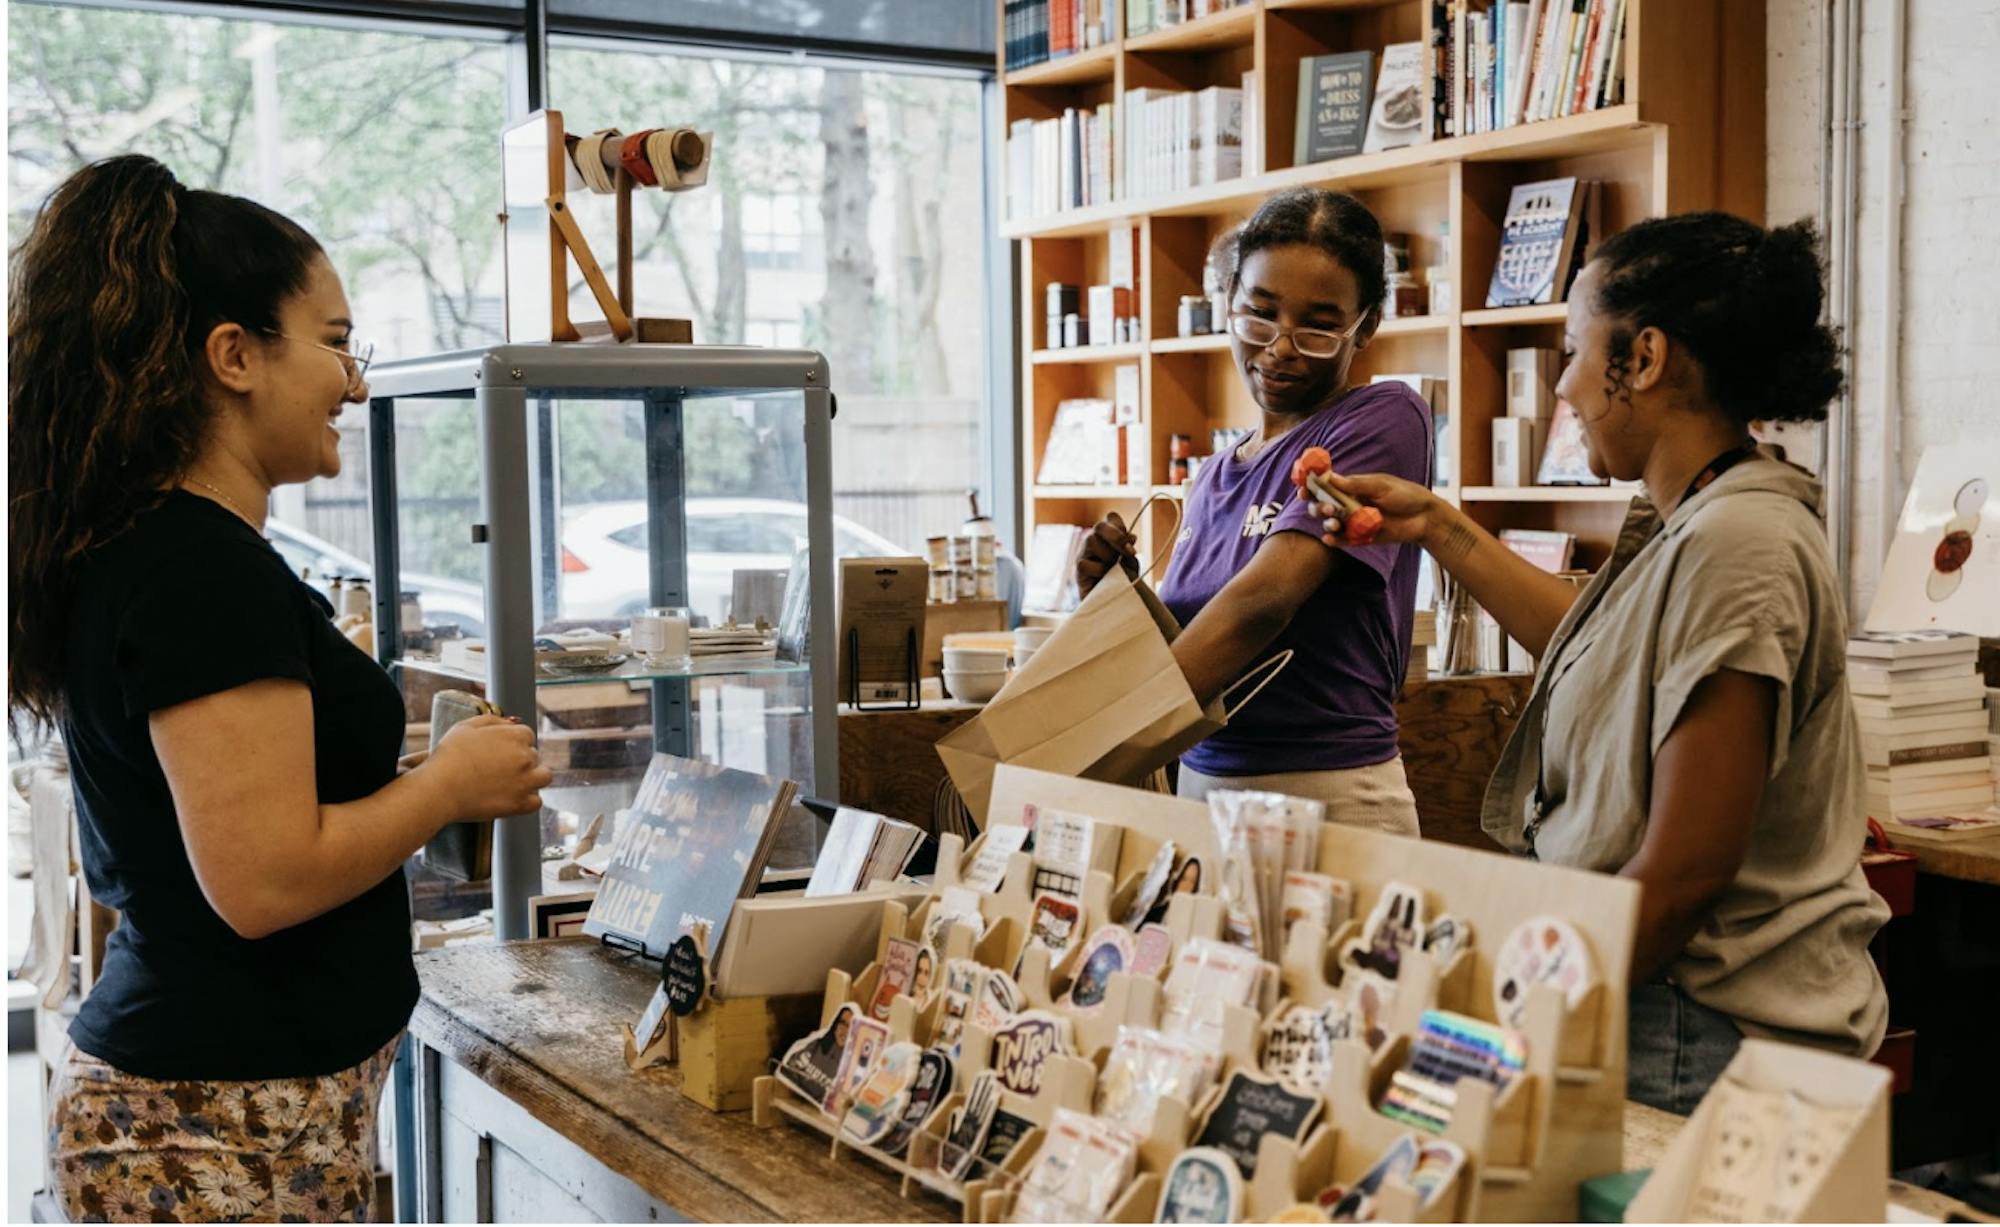 A customer and employees pictured in the bookstore.